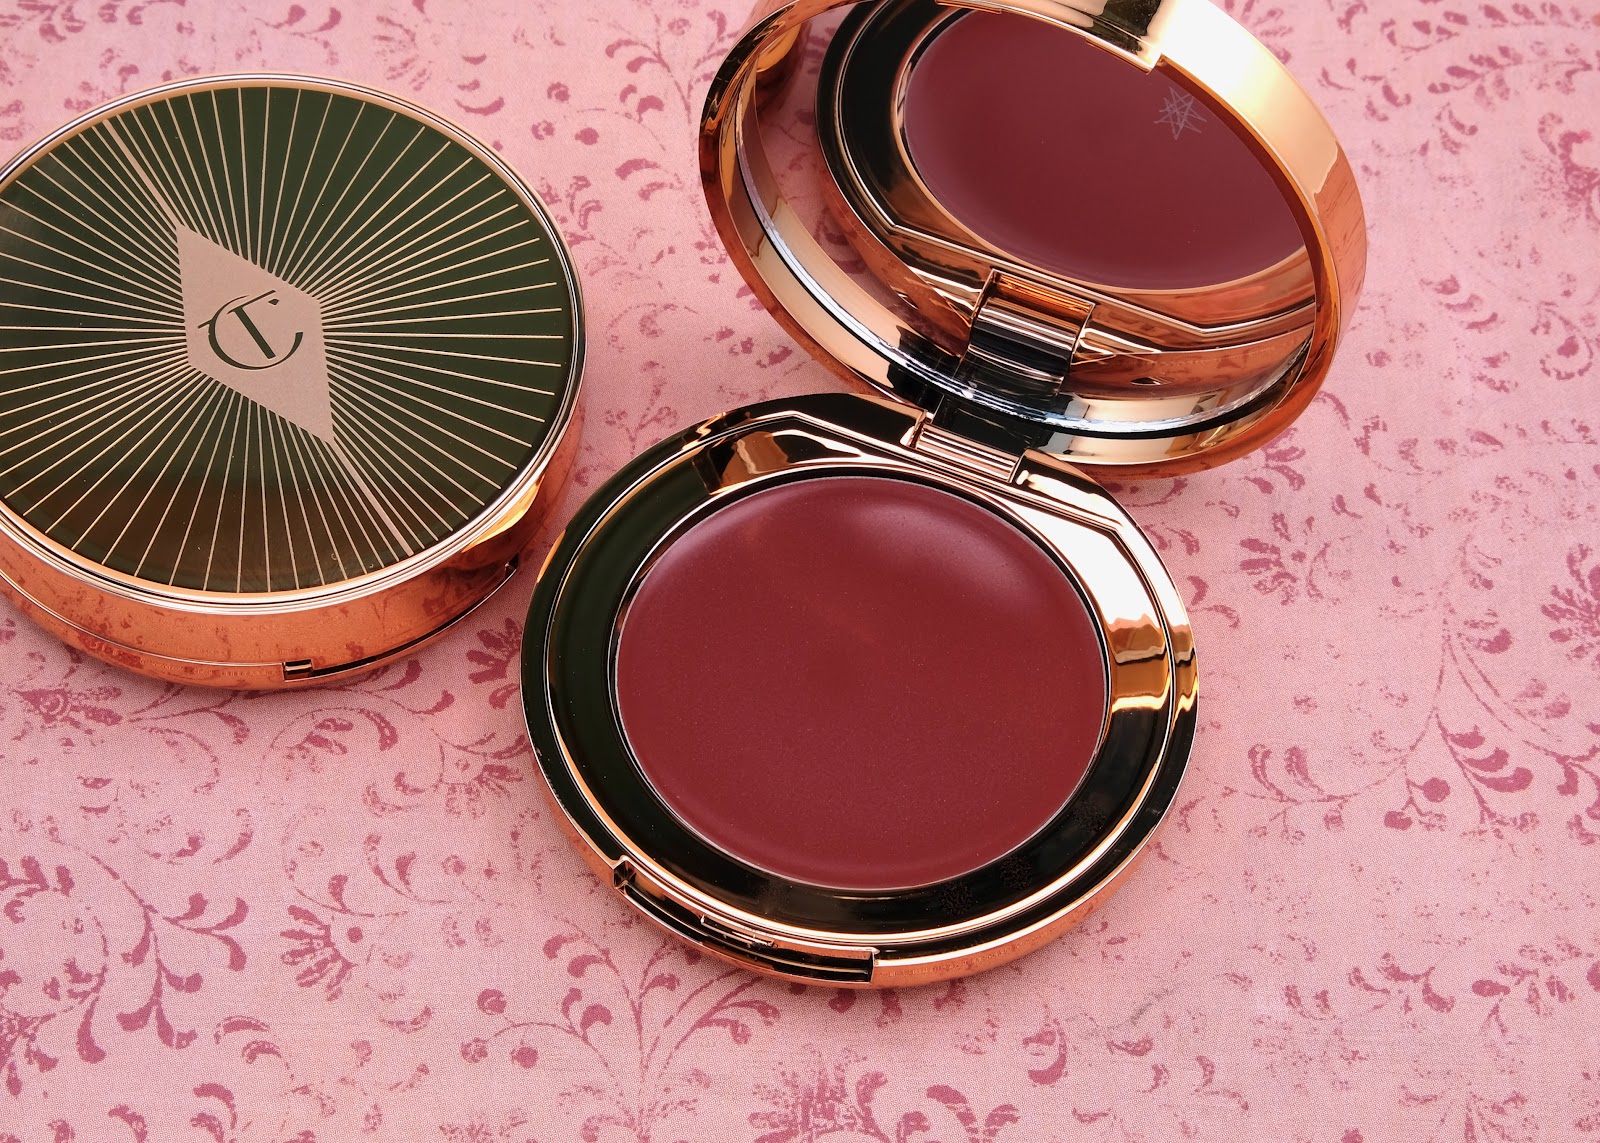 Charlotte Tilbury | Pillow Talk Lip & Cheek Glow: Review and Swatches